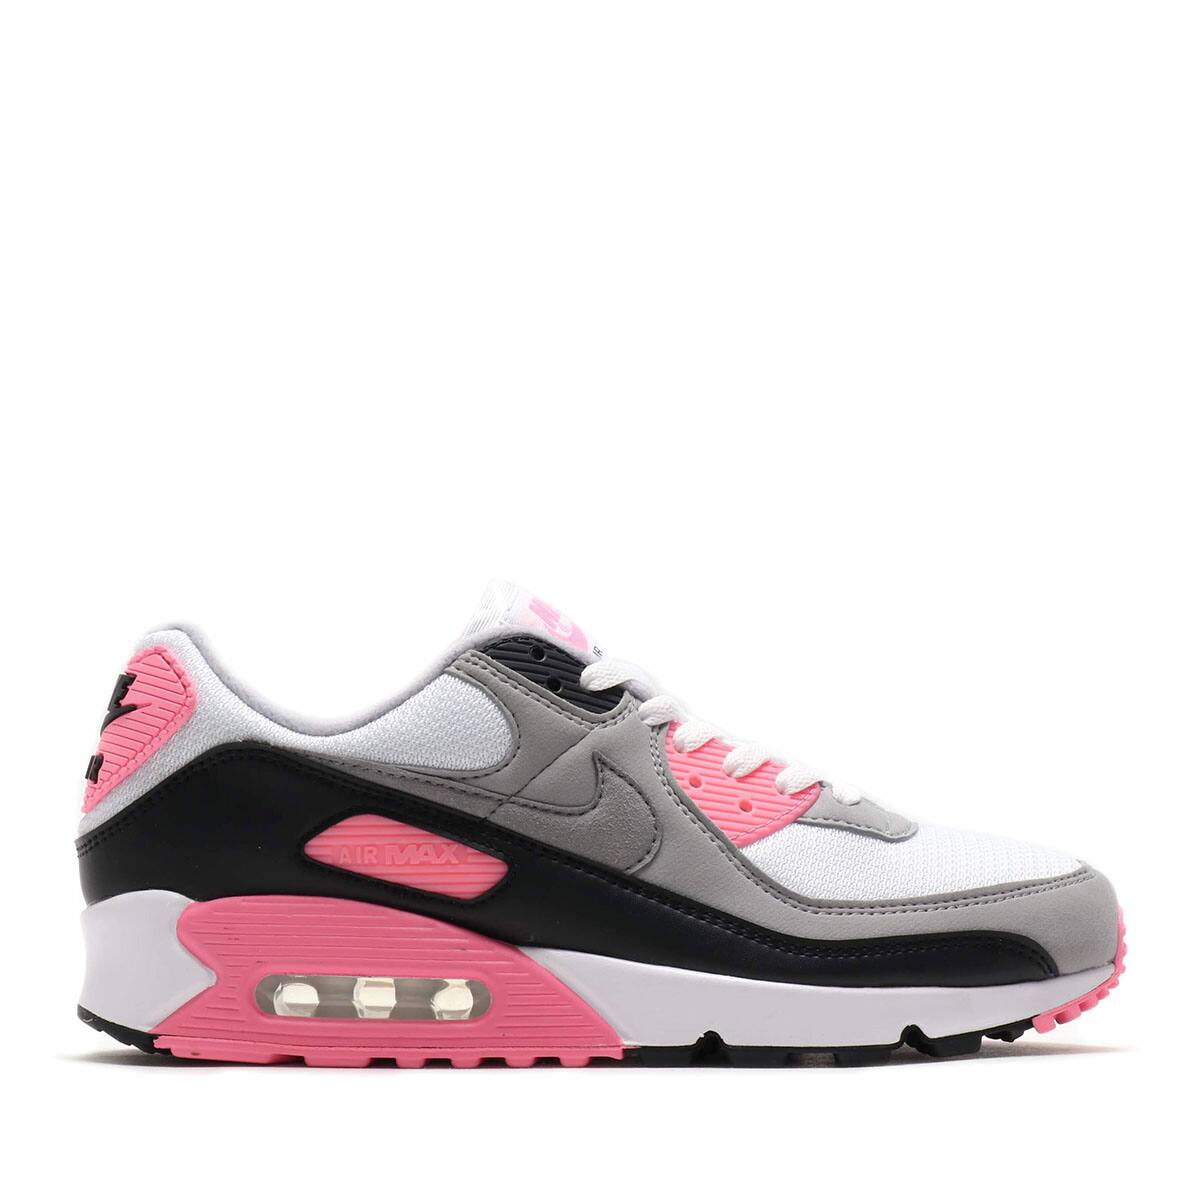 NIKE AIR MAX 90 WHITE/PARTICLE GREY-ROSE-BLACK 20SP-S